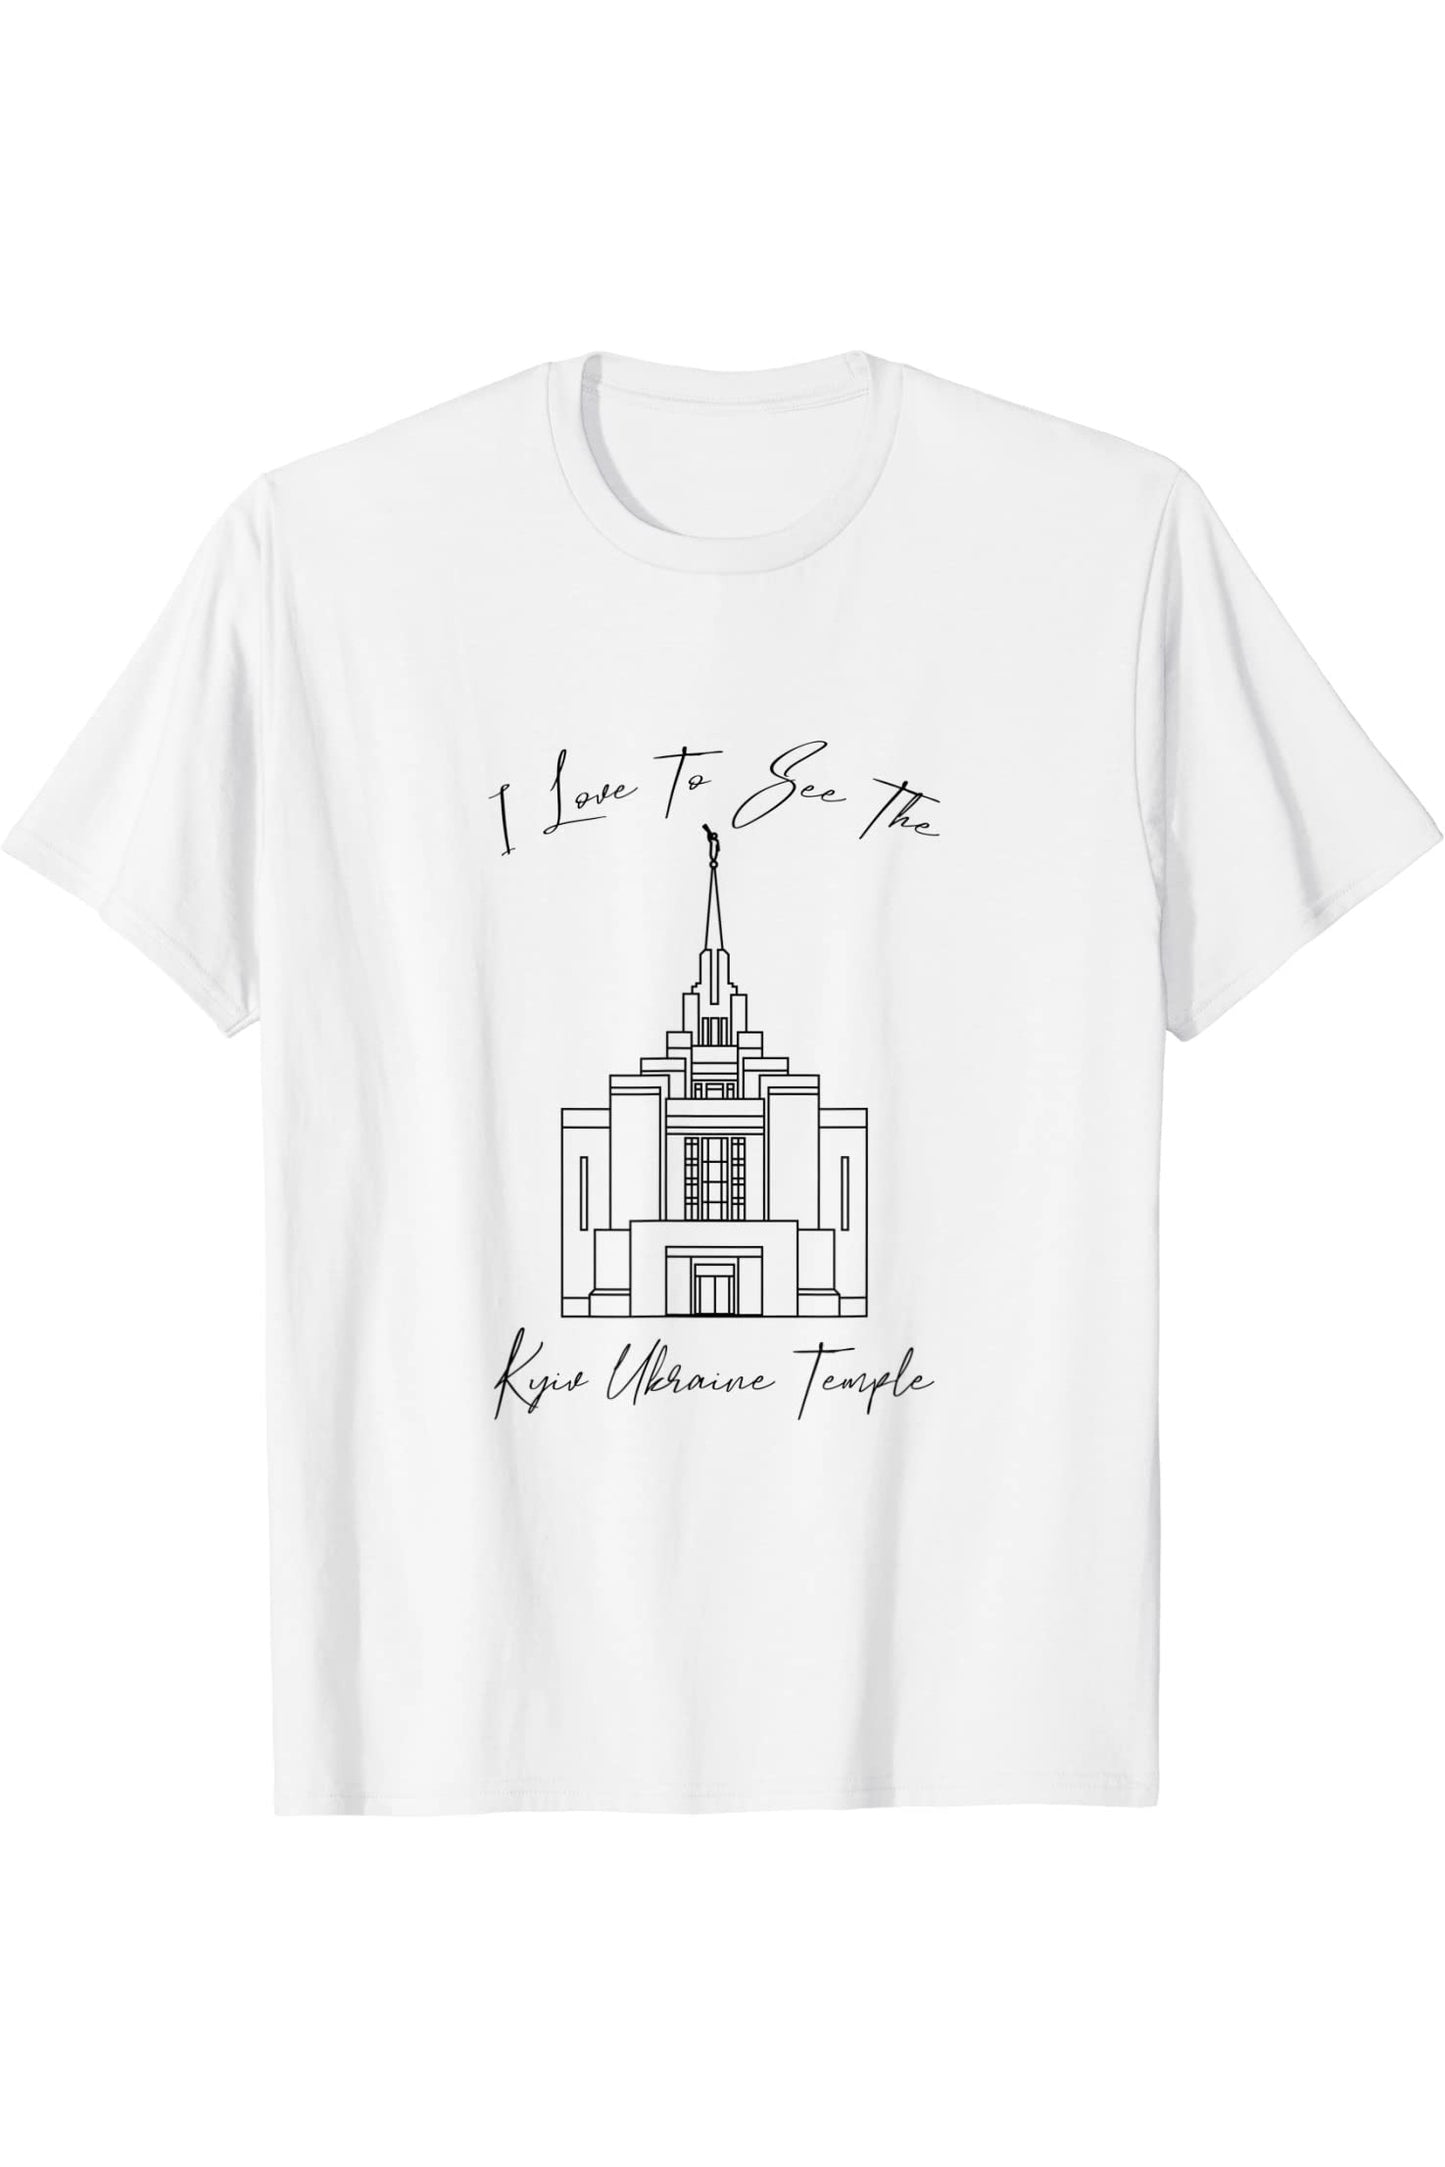 Kyiv Ukraine Tempel, I love to see my temple, calligraphy T-Shirt